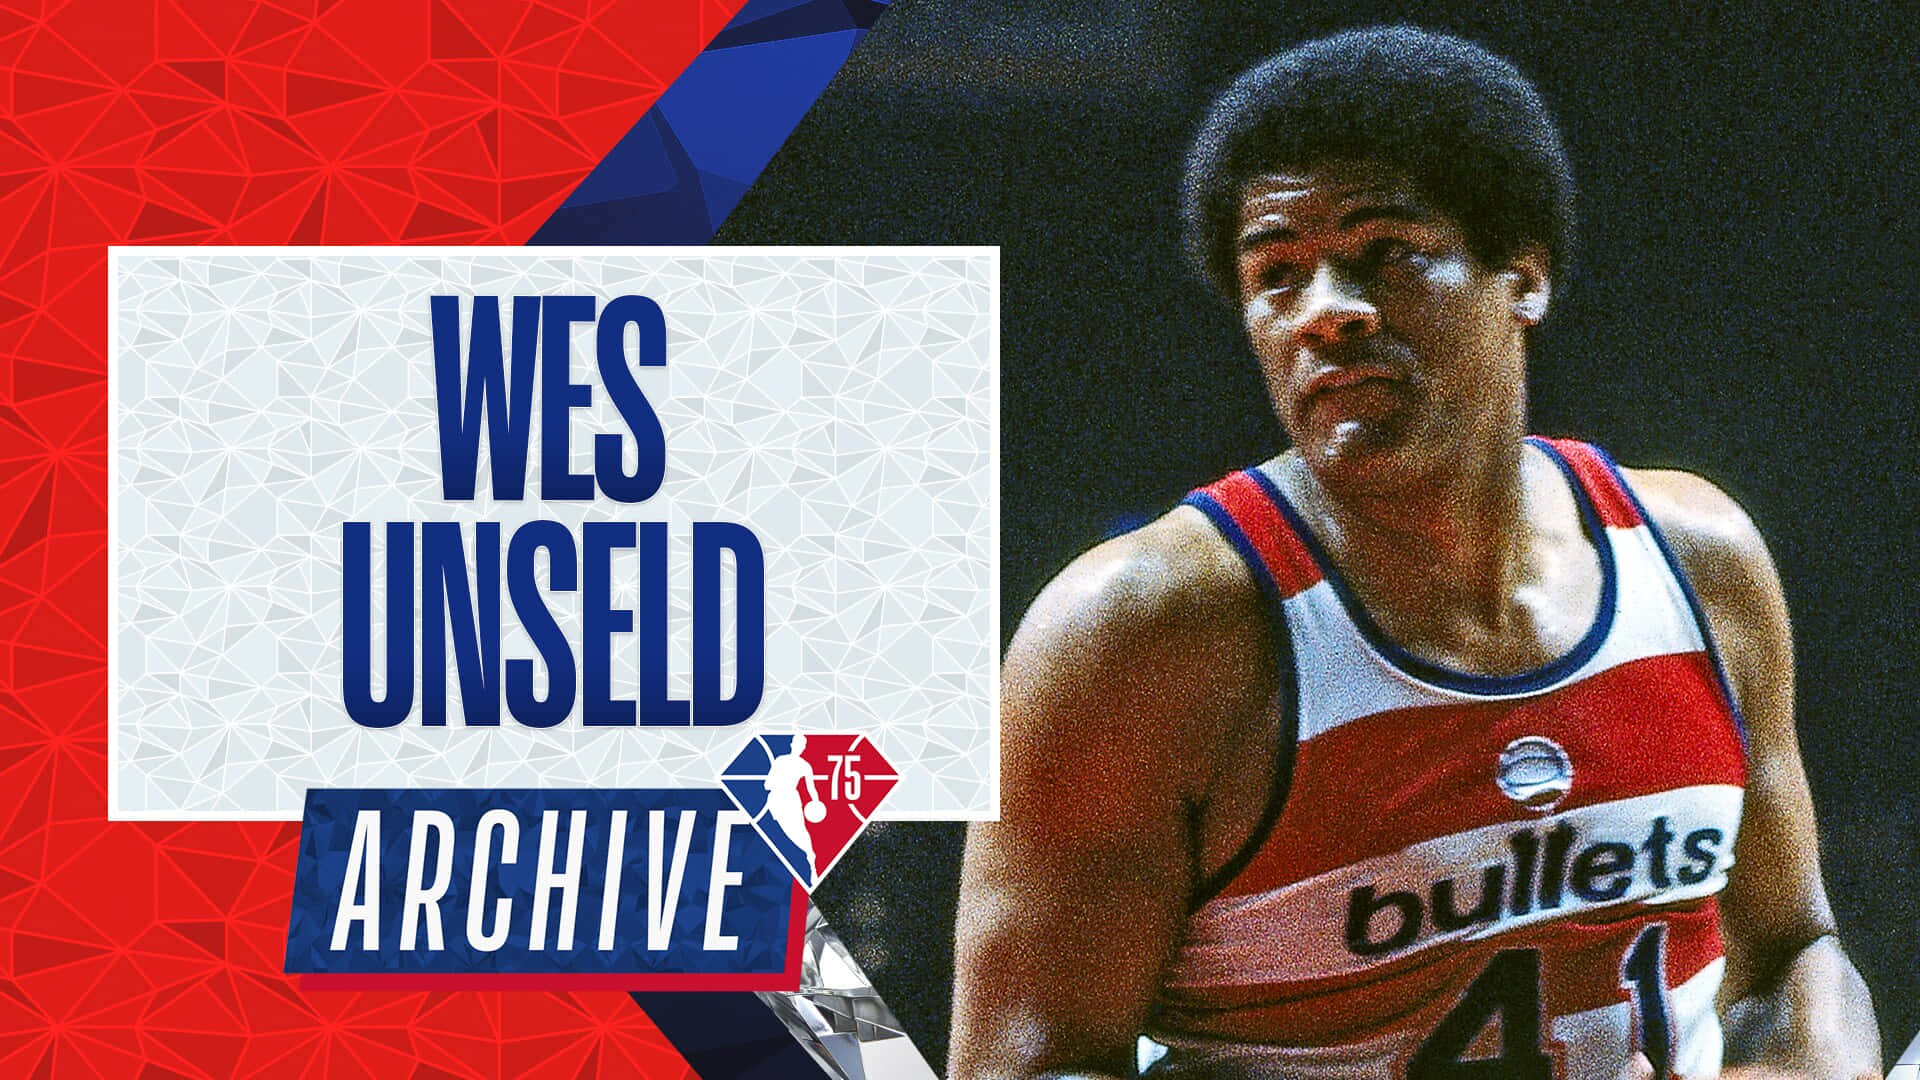 Wes Unseld Basketball NBA Archives Wallpaper